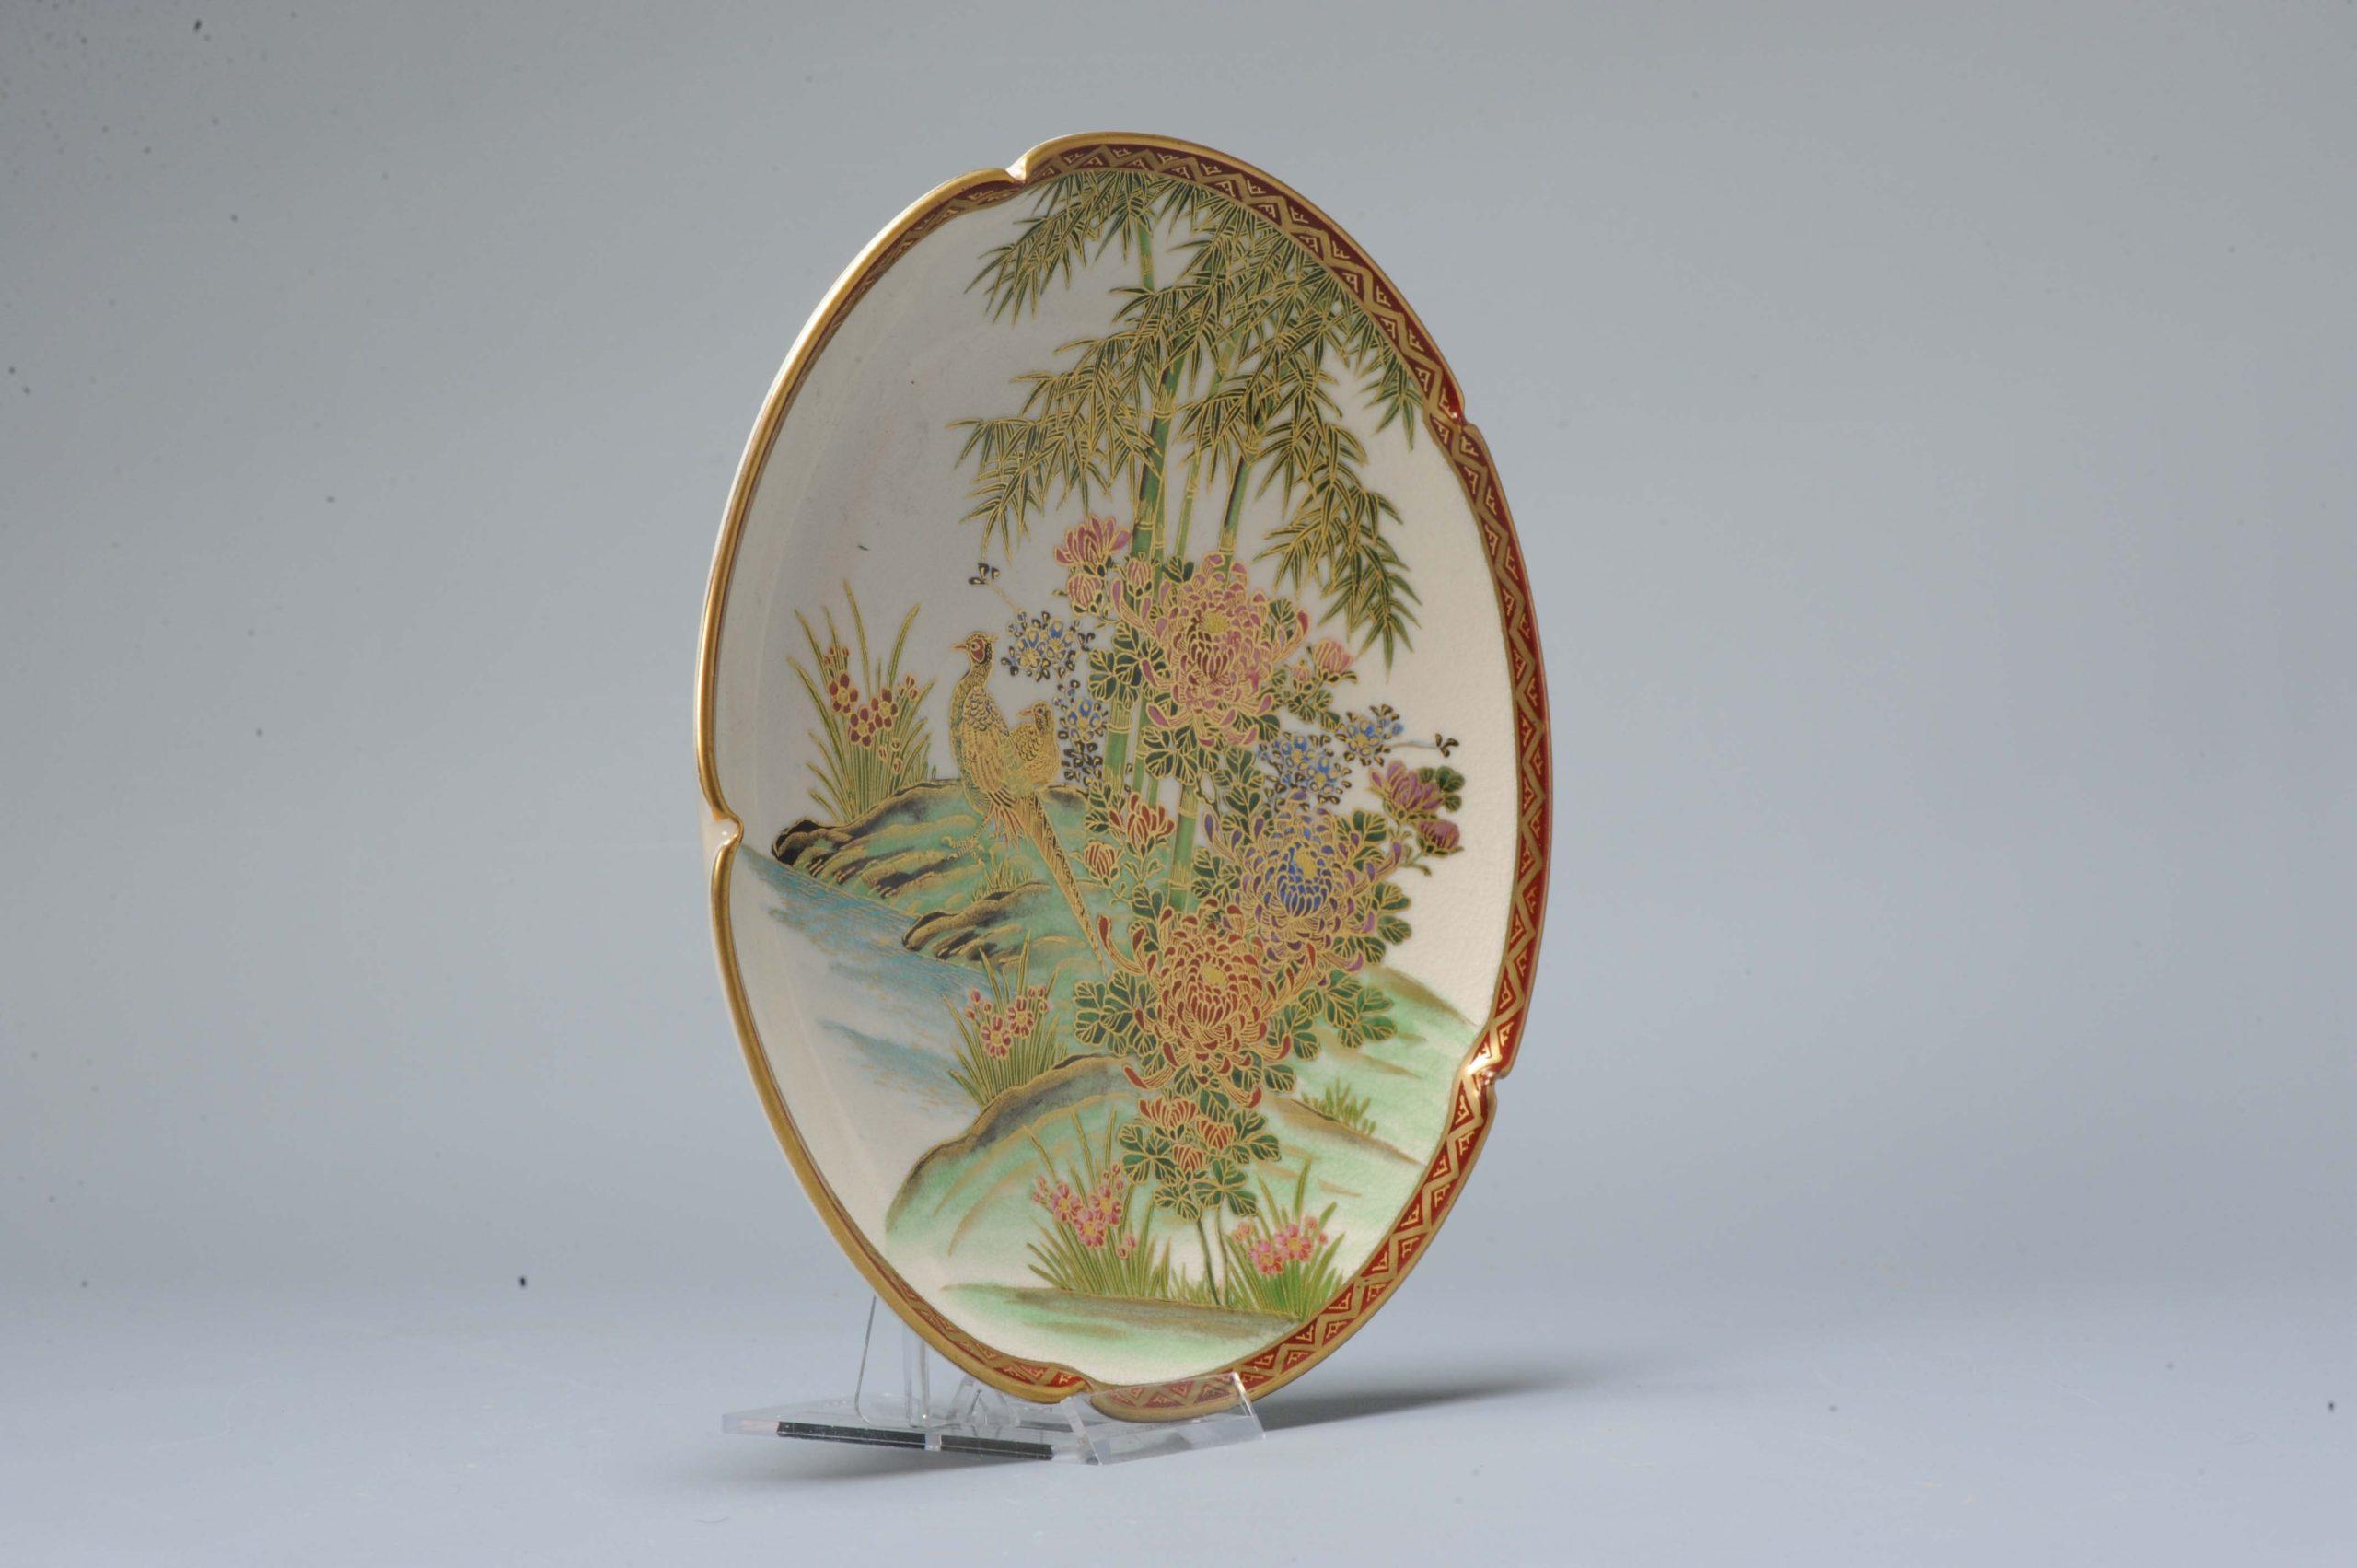 Fabulous Japanese earthenware Satsuma plate with nice decoration of a bird. Meiji period, 19th c

Lovely piece.

Marked at base and written text; Hand Painted Kobe Japan.

Additional information:
Material: Porcelain & Pottery
Type: Plates
Japanese